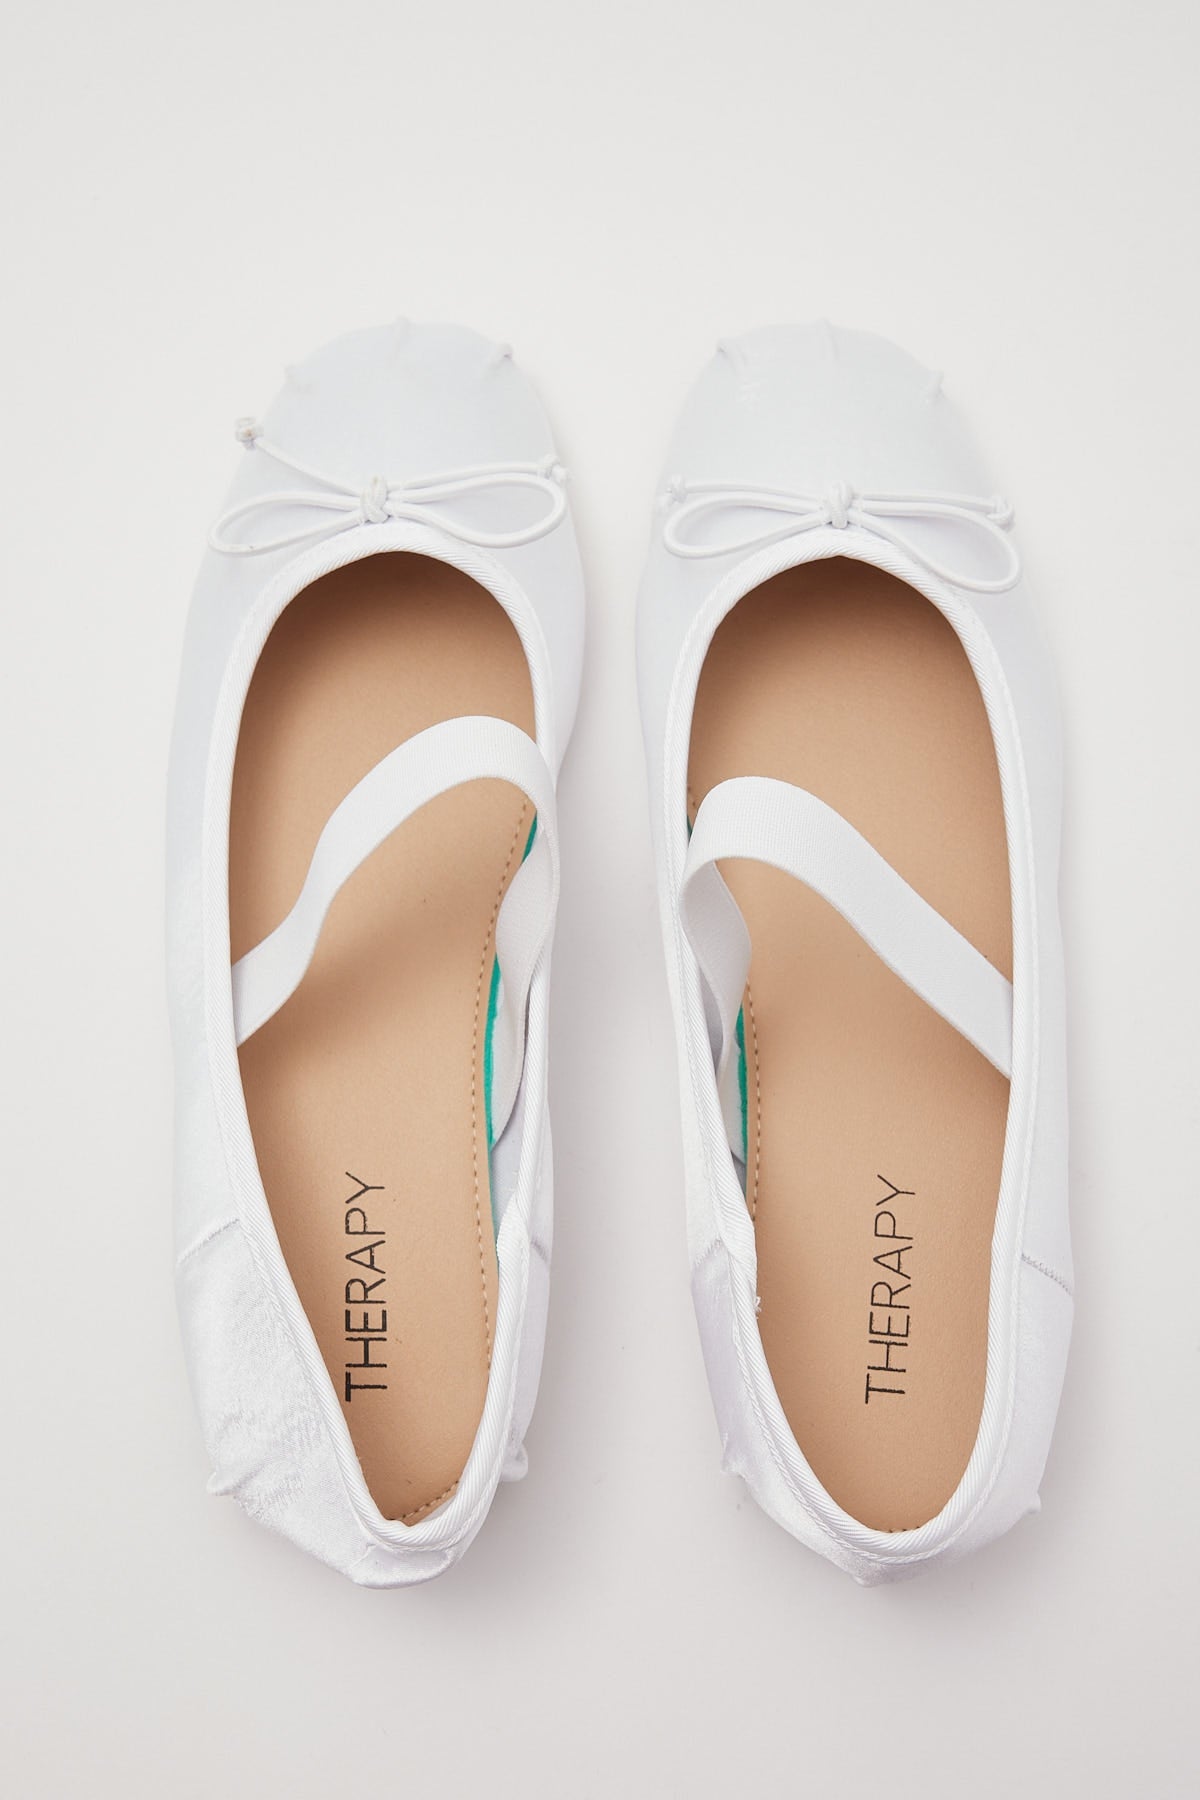 Therapy Mystic Ballet Flat Pearl Satin